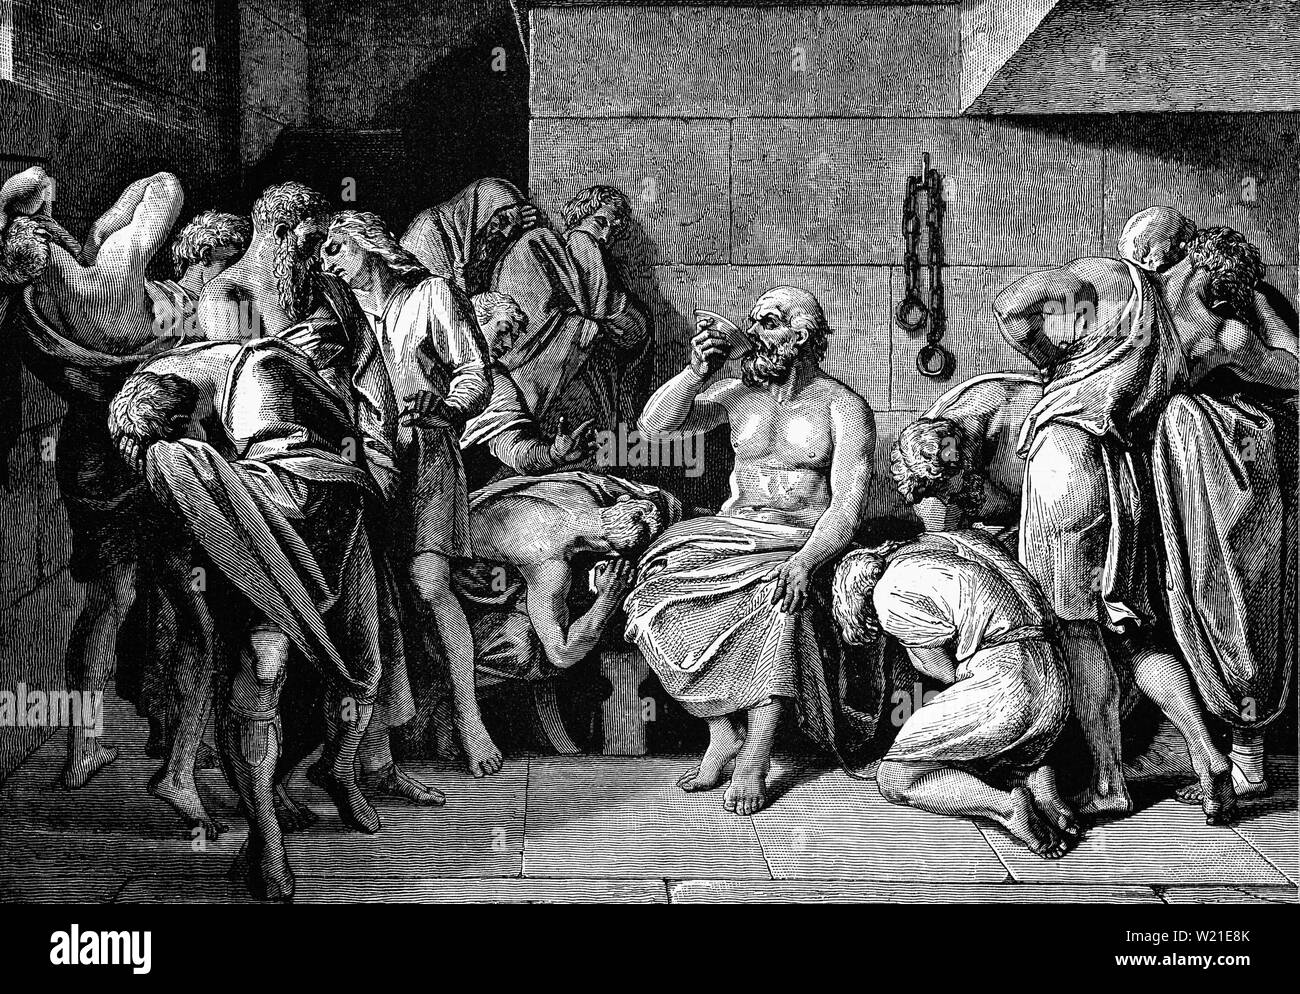 The death of Socrates (470 – 399 BCE), the classical Greek (Athenian) philosopher credited as one of the founders of Western philosophy, and the first moral philosopher of the Western ethical tradition of thought. An enigmatic figure, he made no writings, and is known chiefly through the accounts of his students Plato and Xenophon.  In 399 BC, Socrates went on trial and was subsequently found guilty of both corrupting the minds of the youth of Athens and of impiety (not believing in the gods of the state). He was sentenced to death by drinking poison hemlock. Stock Photo